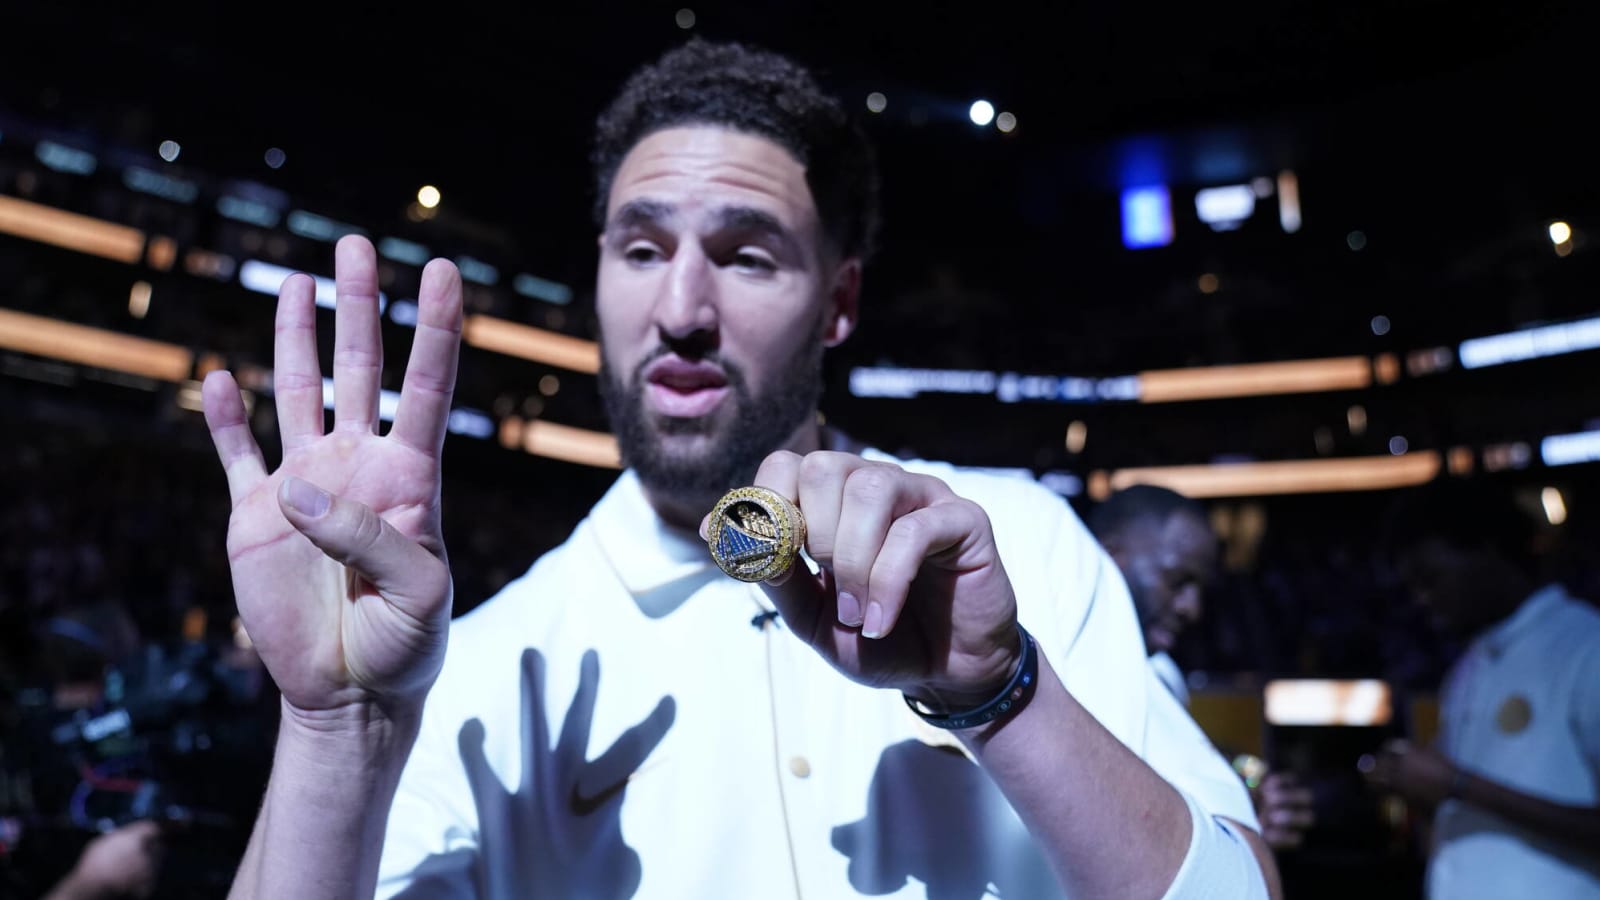 Warriors hold ring ceremony ahead of Opening Night matchup